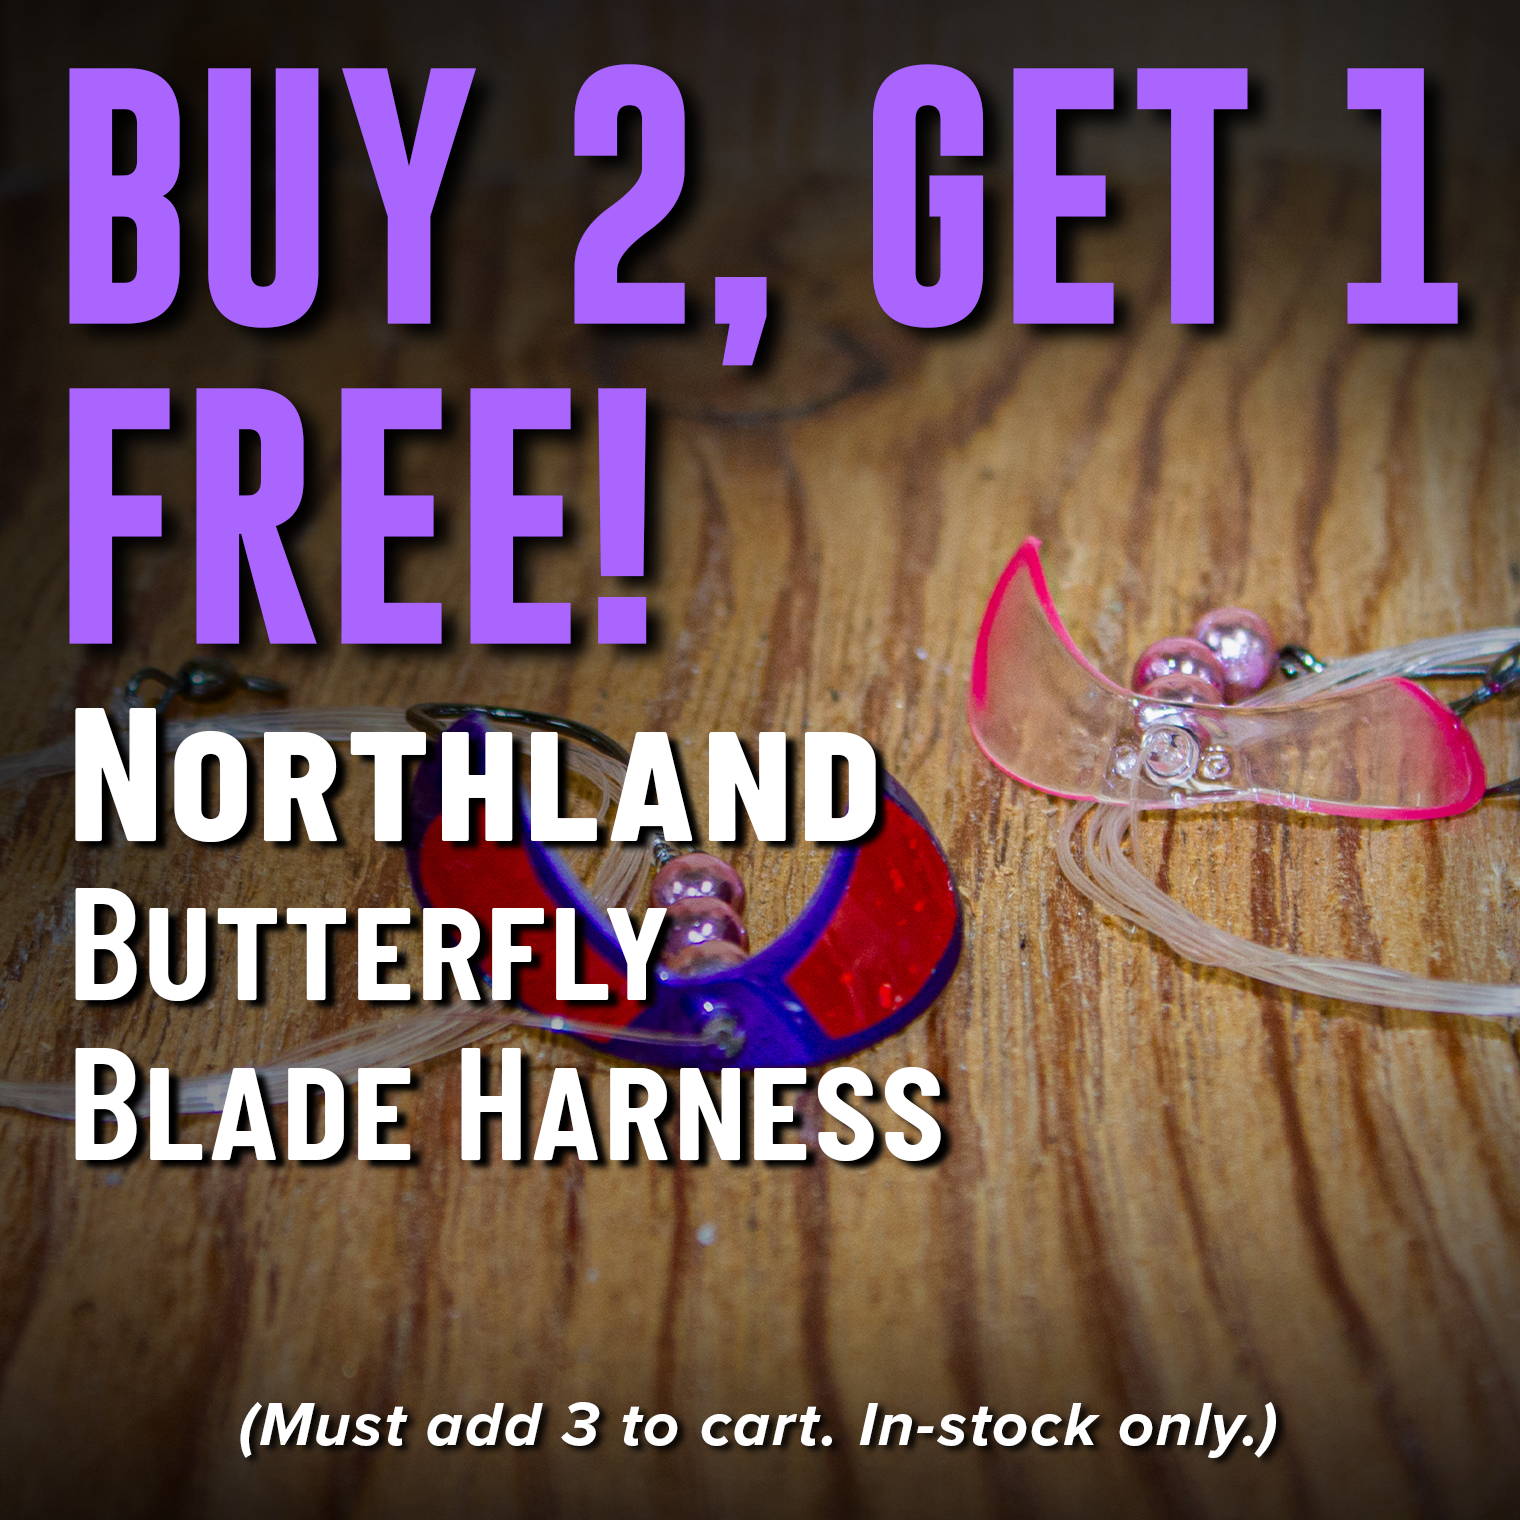 Buy 2, Get 1 Free! Northland Butterfly Blade Harness (Must add 3 to cart. In-stock only.)